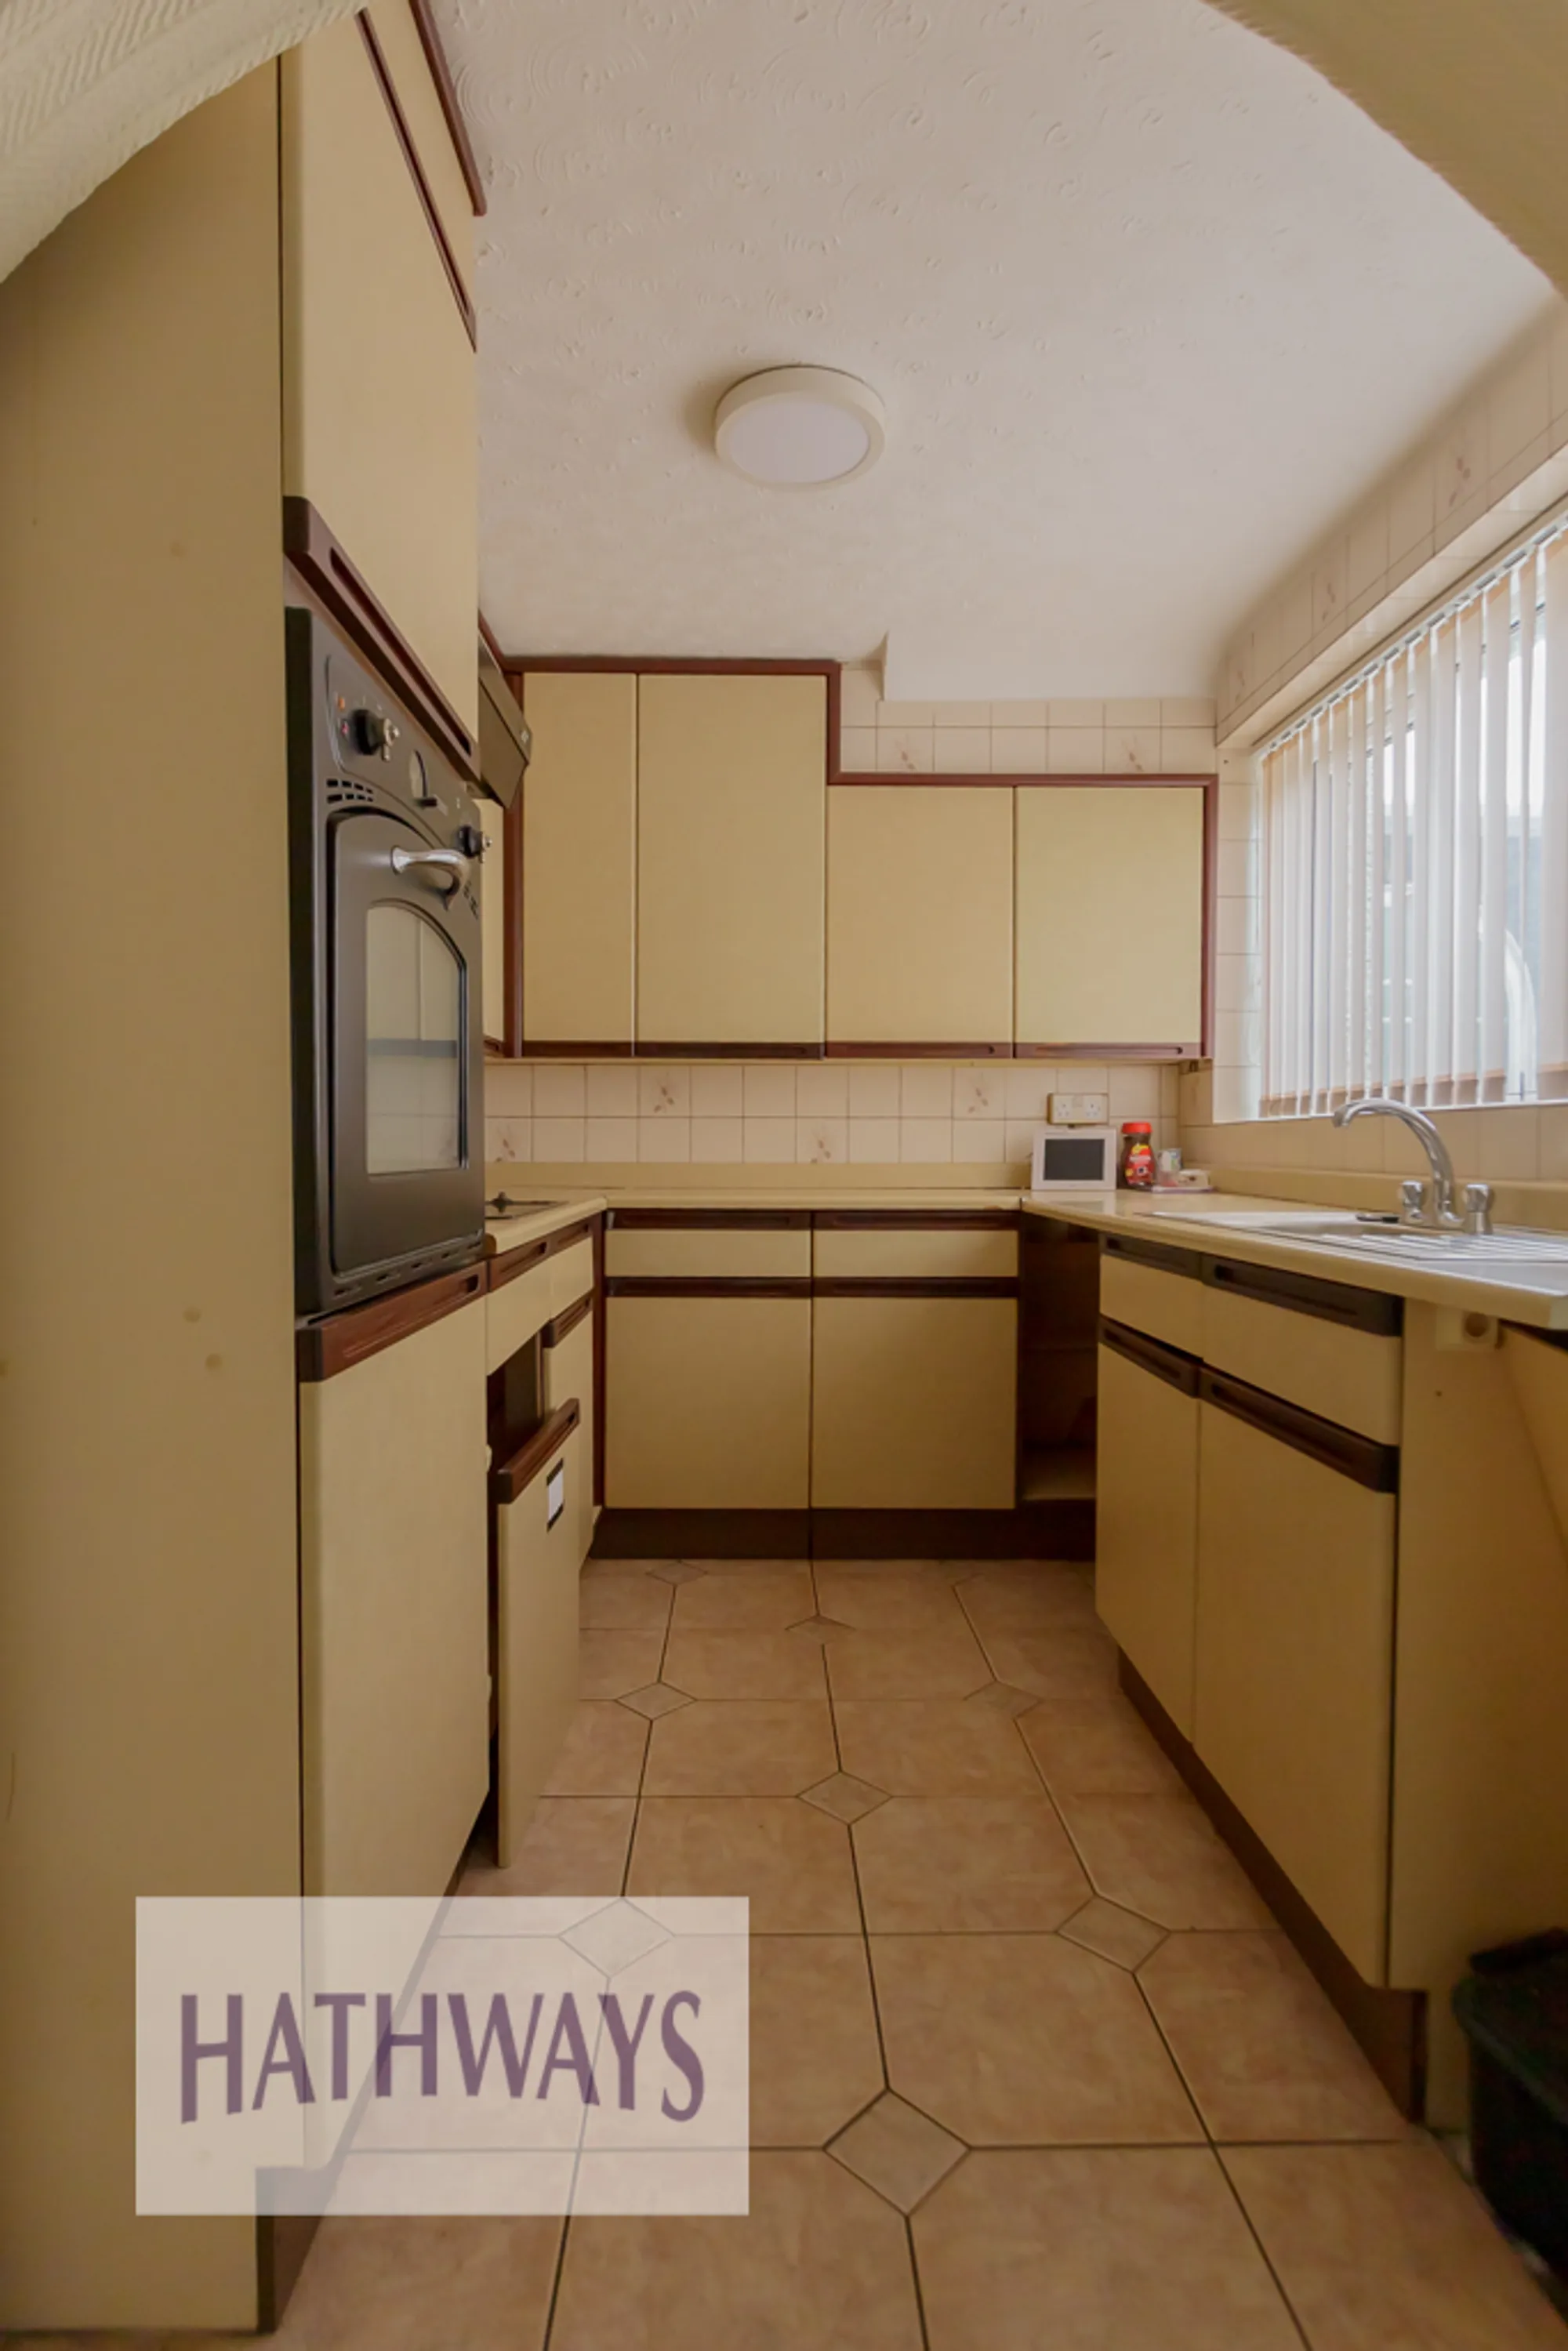 3 bed mid-terraced house for sale in Brynhyfryd, Cwmbran  - Property Image 4